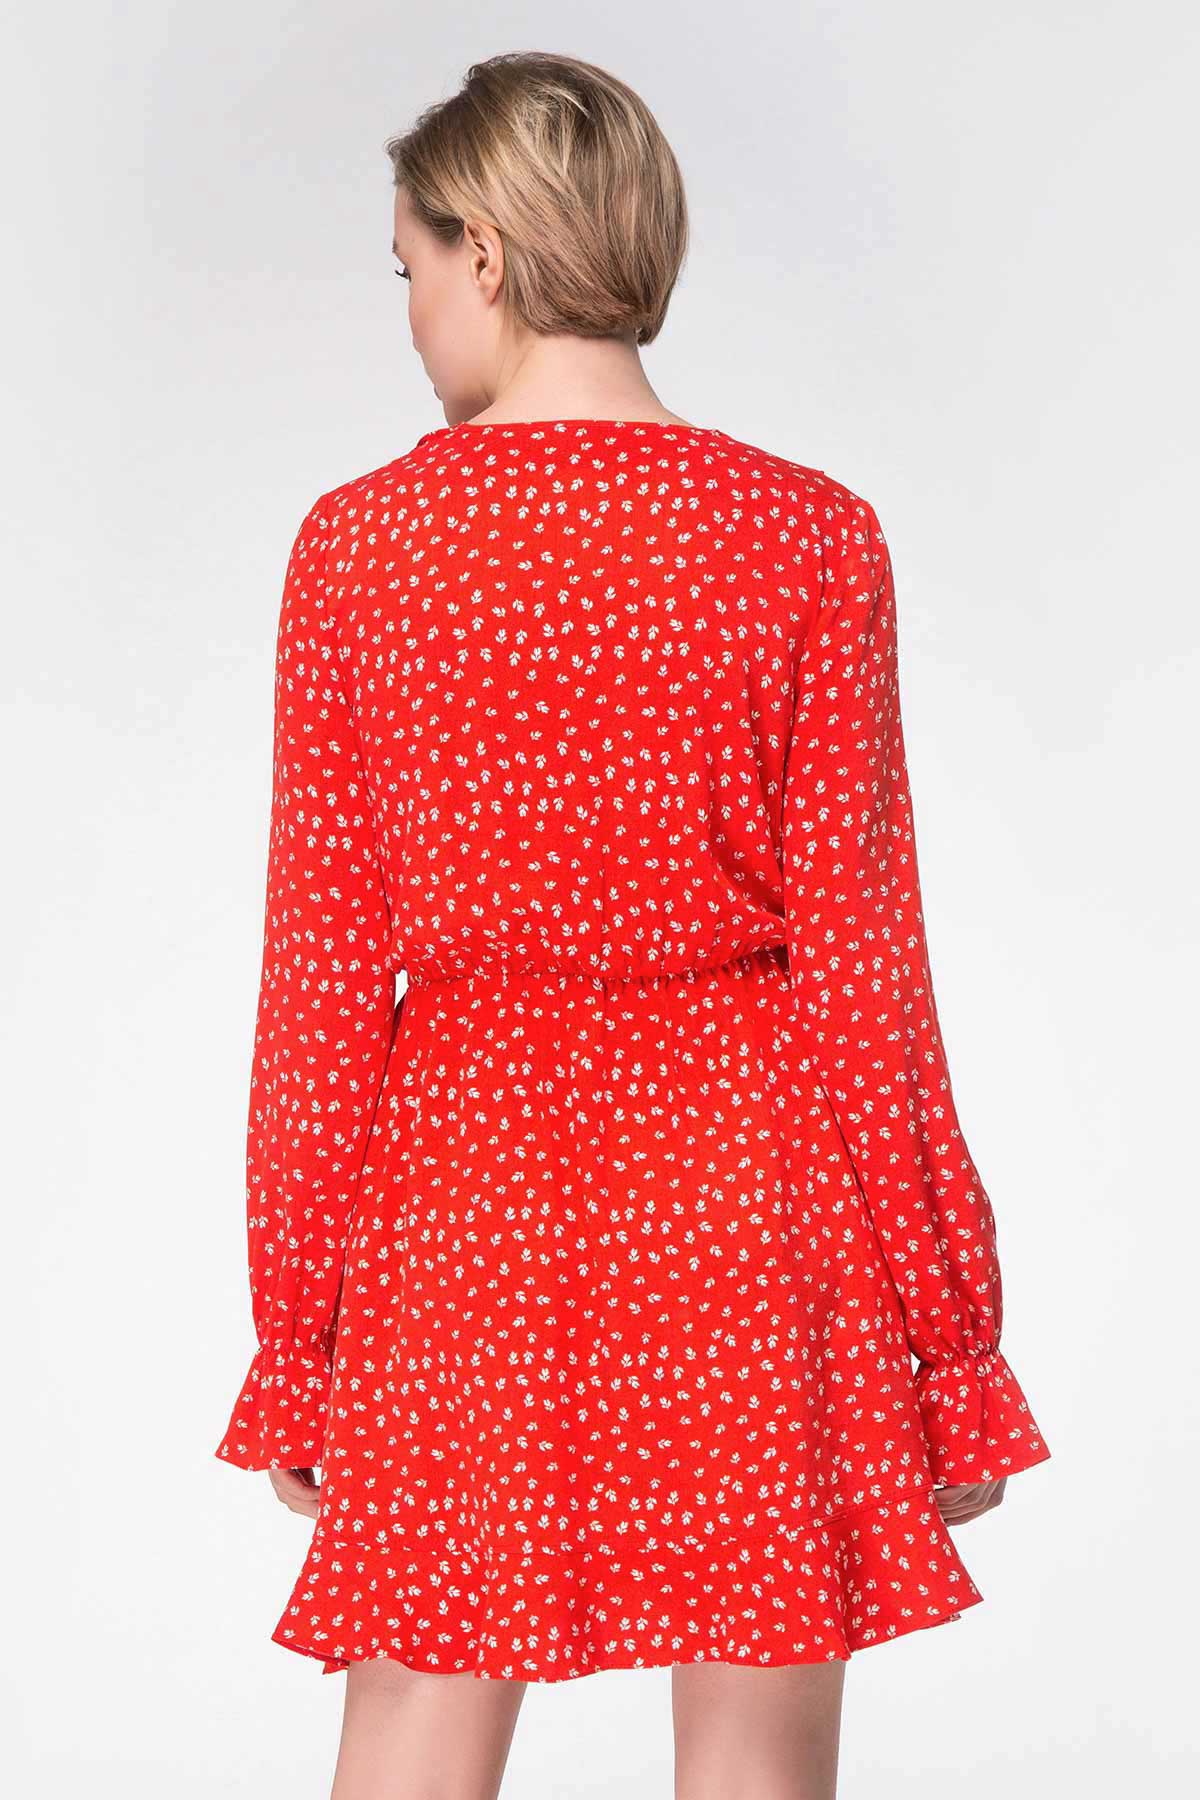 Red dress with flounces and floral print, photo 6